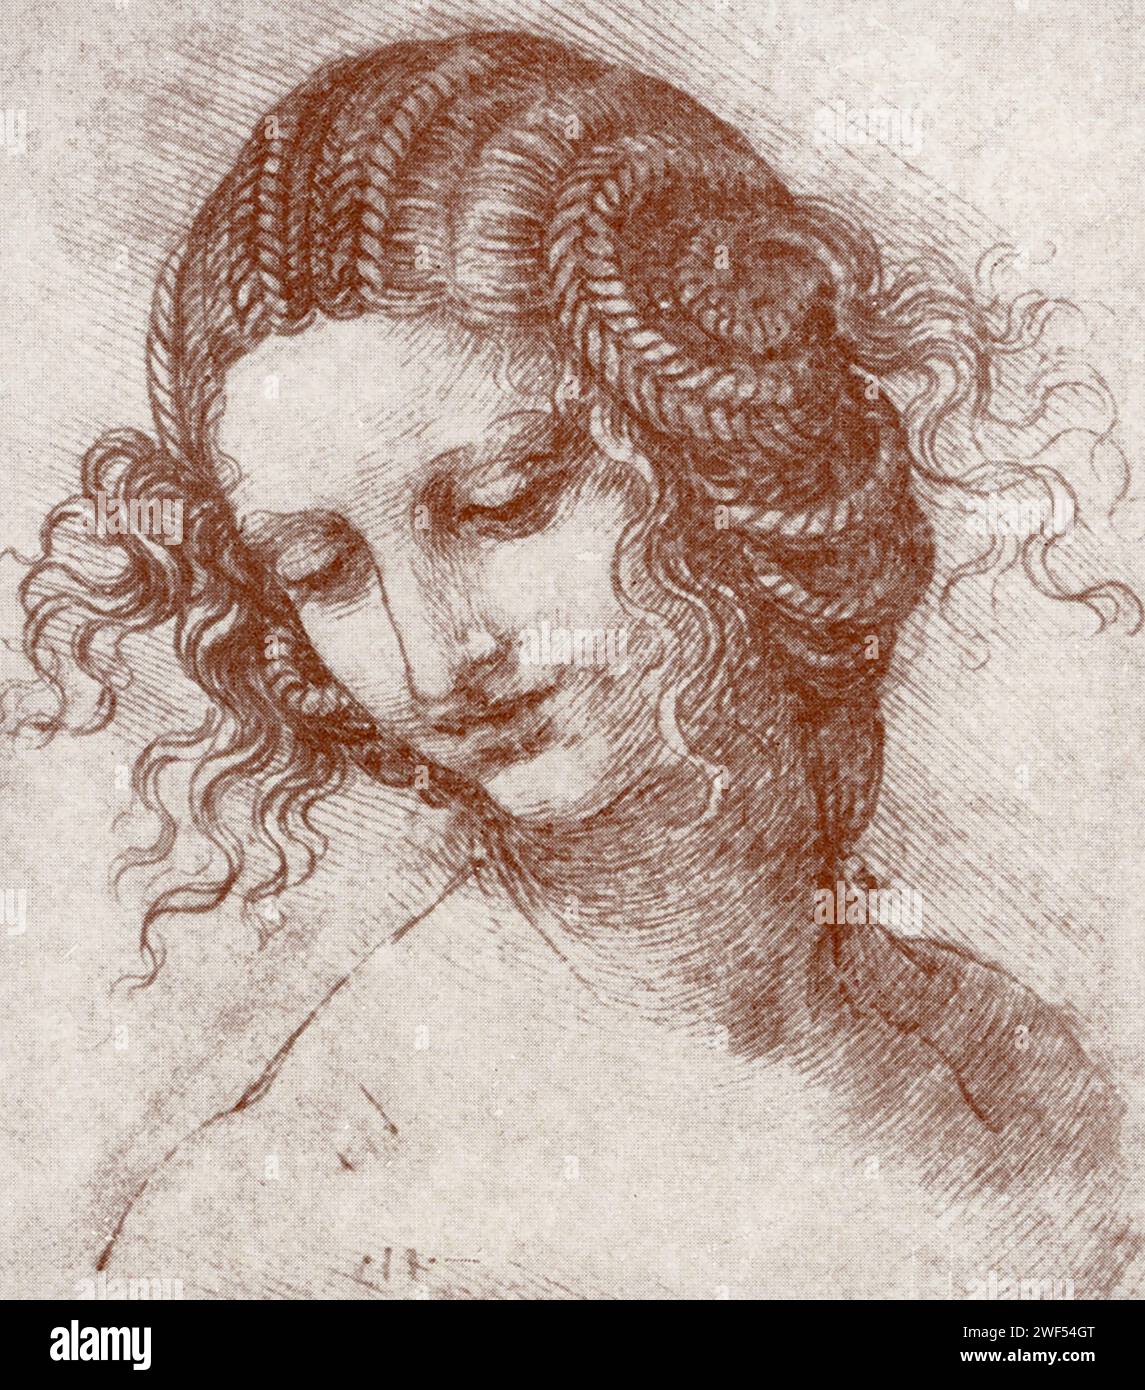 This drawing by Leonardo Da Vinci shows Leonardo’s style- mirror drawings. Here a young woman is shown. Leonardo di ser Piero da Vinci (1452-1519) was an Italian polymath of the High Renaissance who was active as a painter, draughtsman, engineer, scientist, theorist, sculptor, and architect. Stock Photo